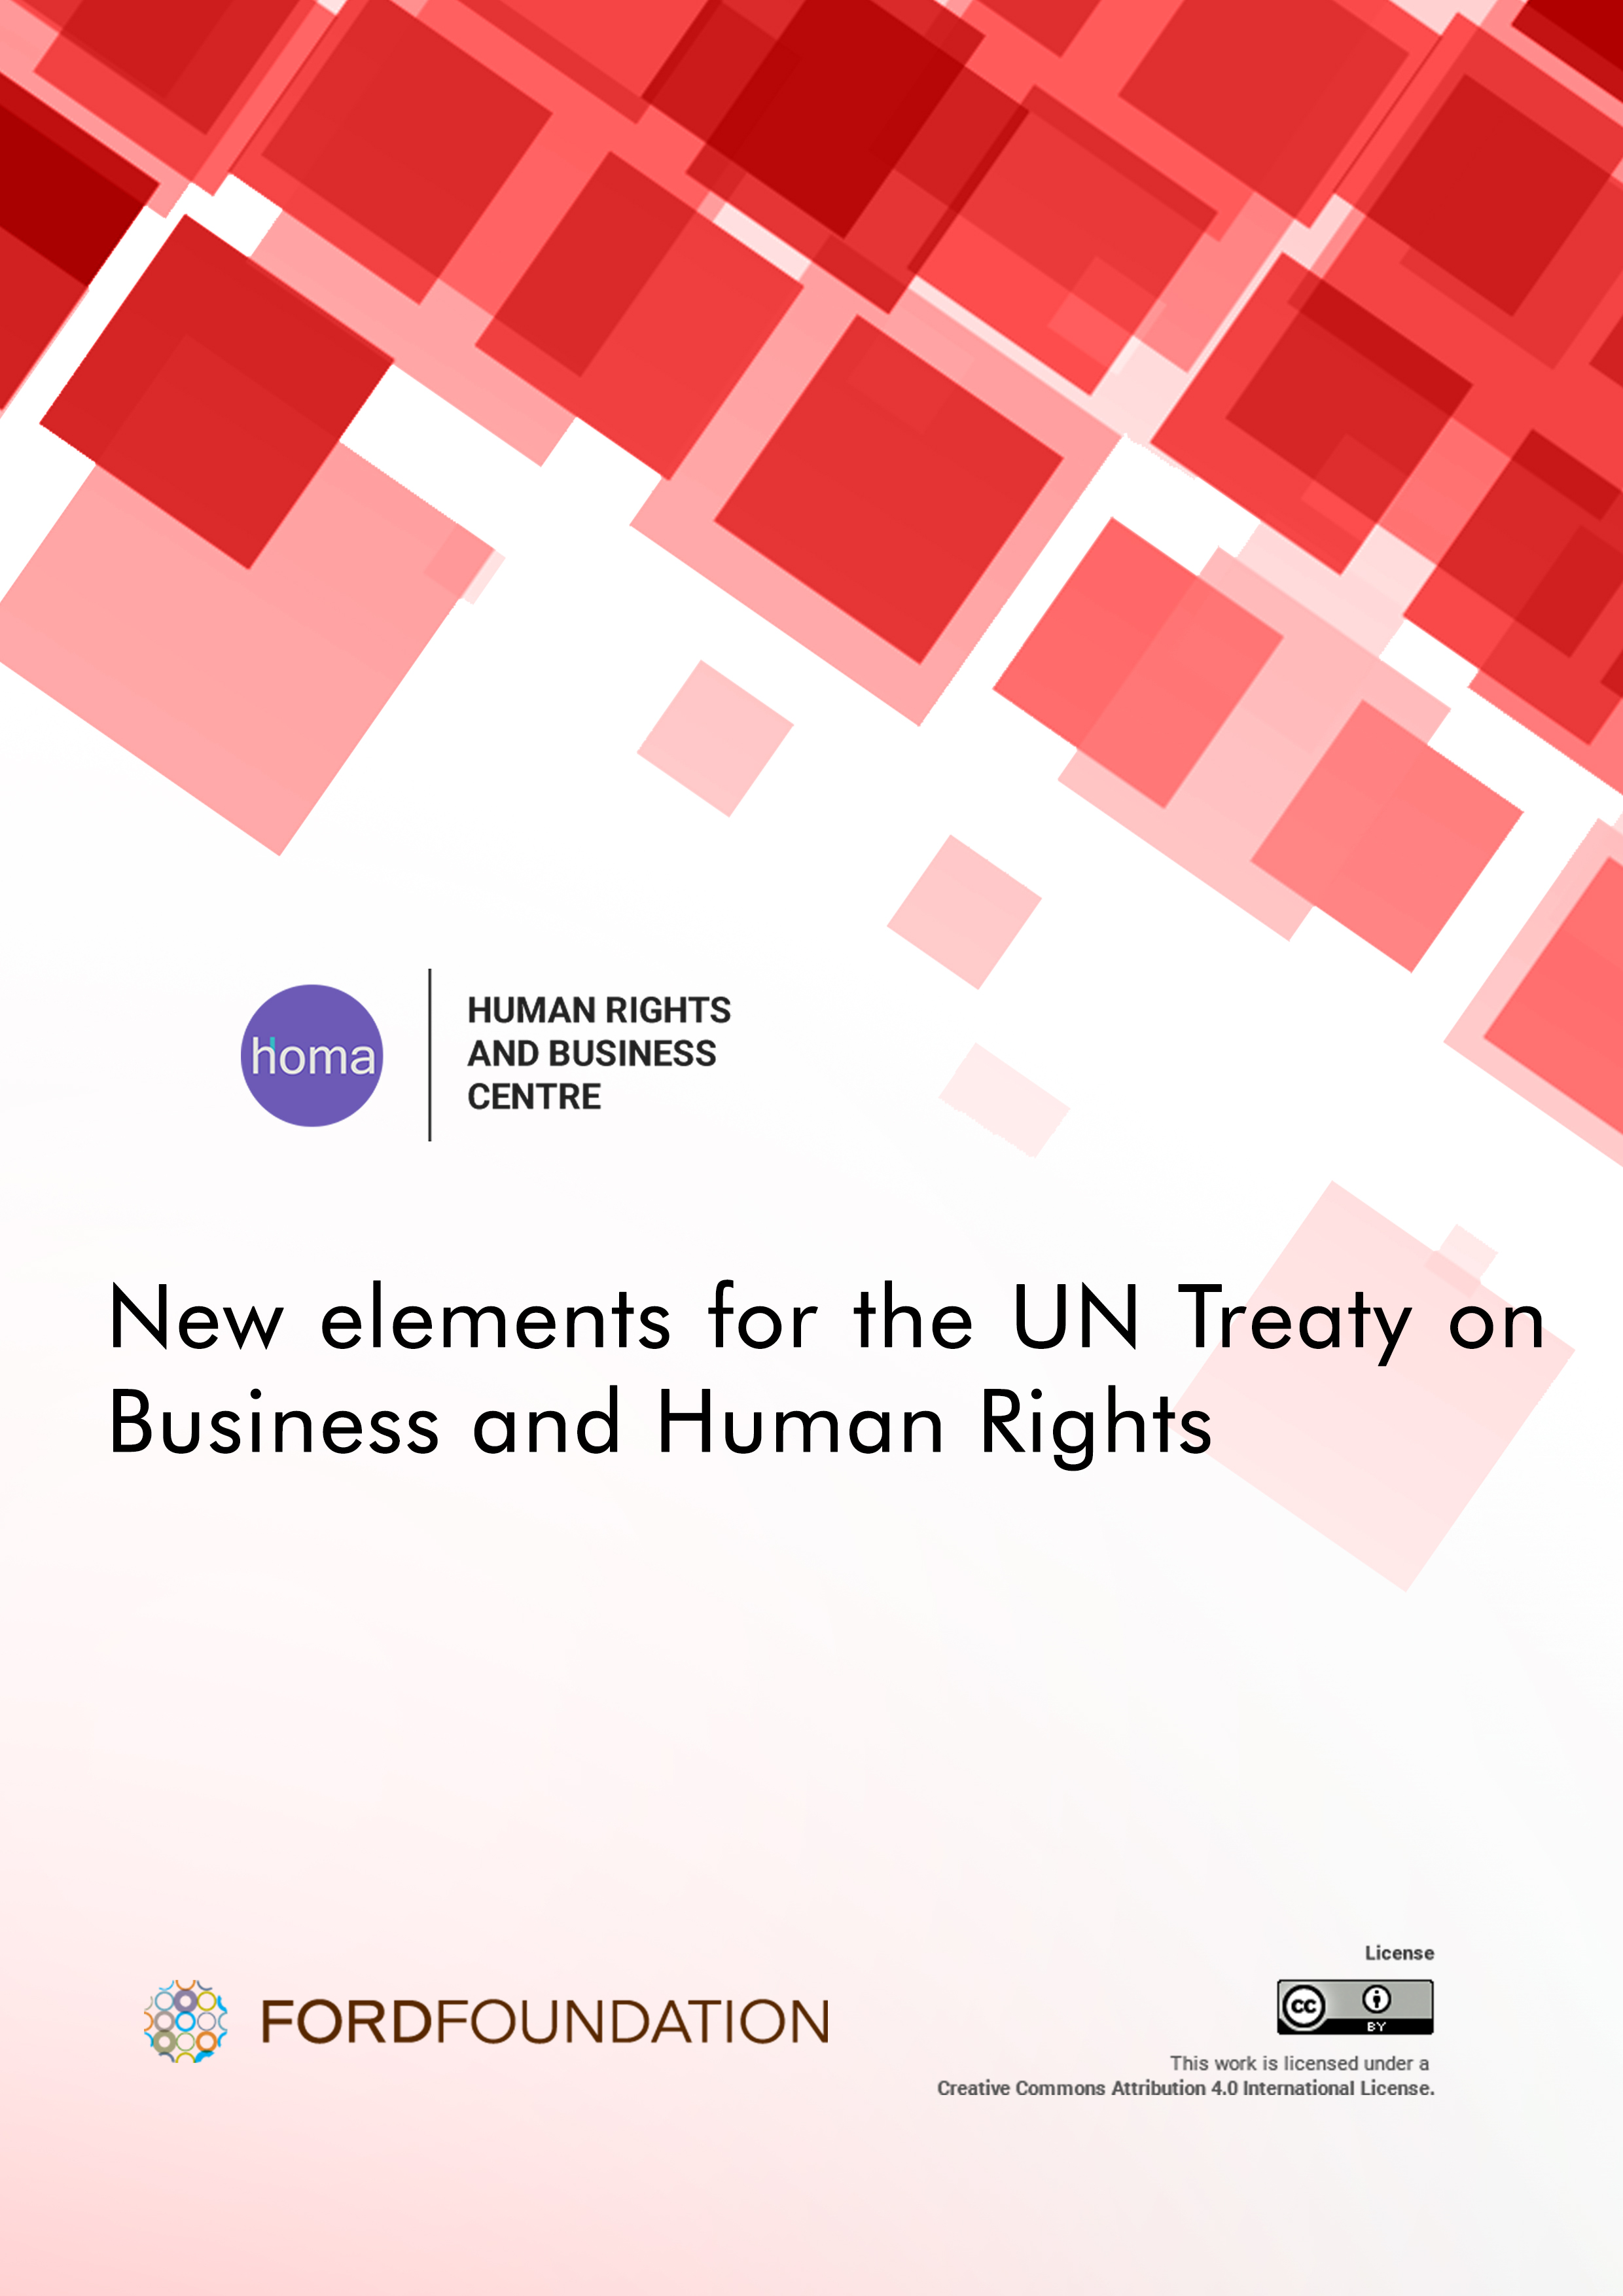 New elements for the UN Business and Human Rights Treaty